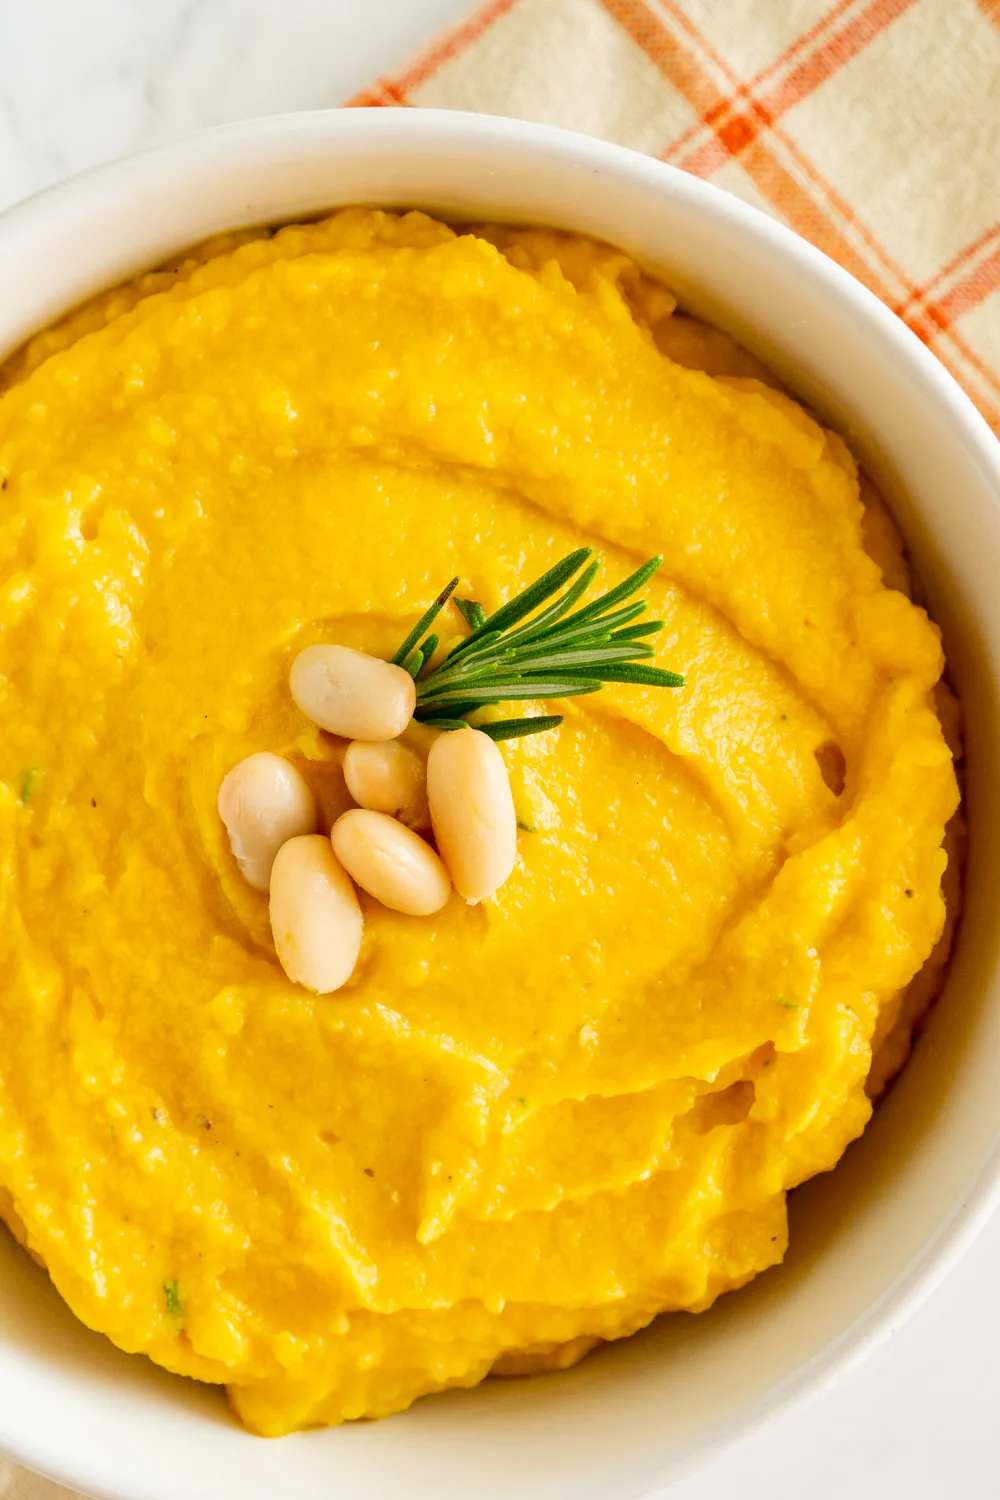 Mashed Butternut Squash with White Beans